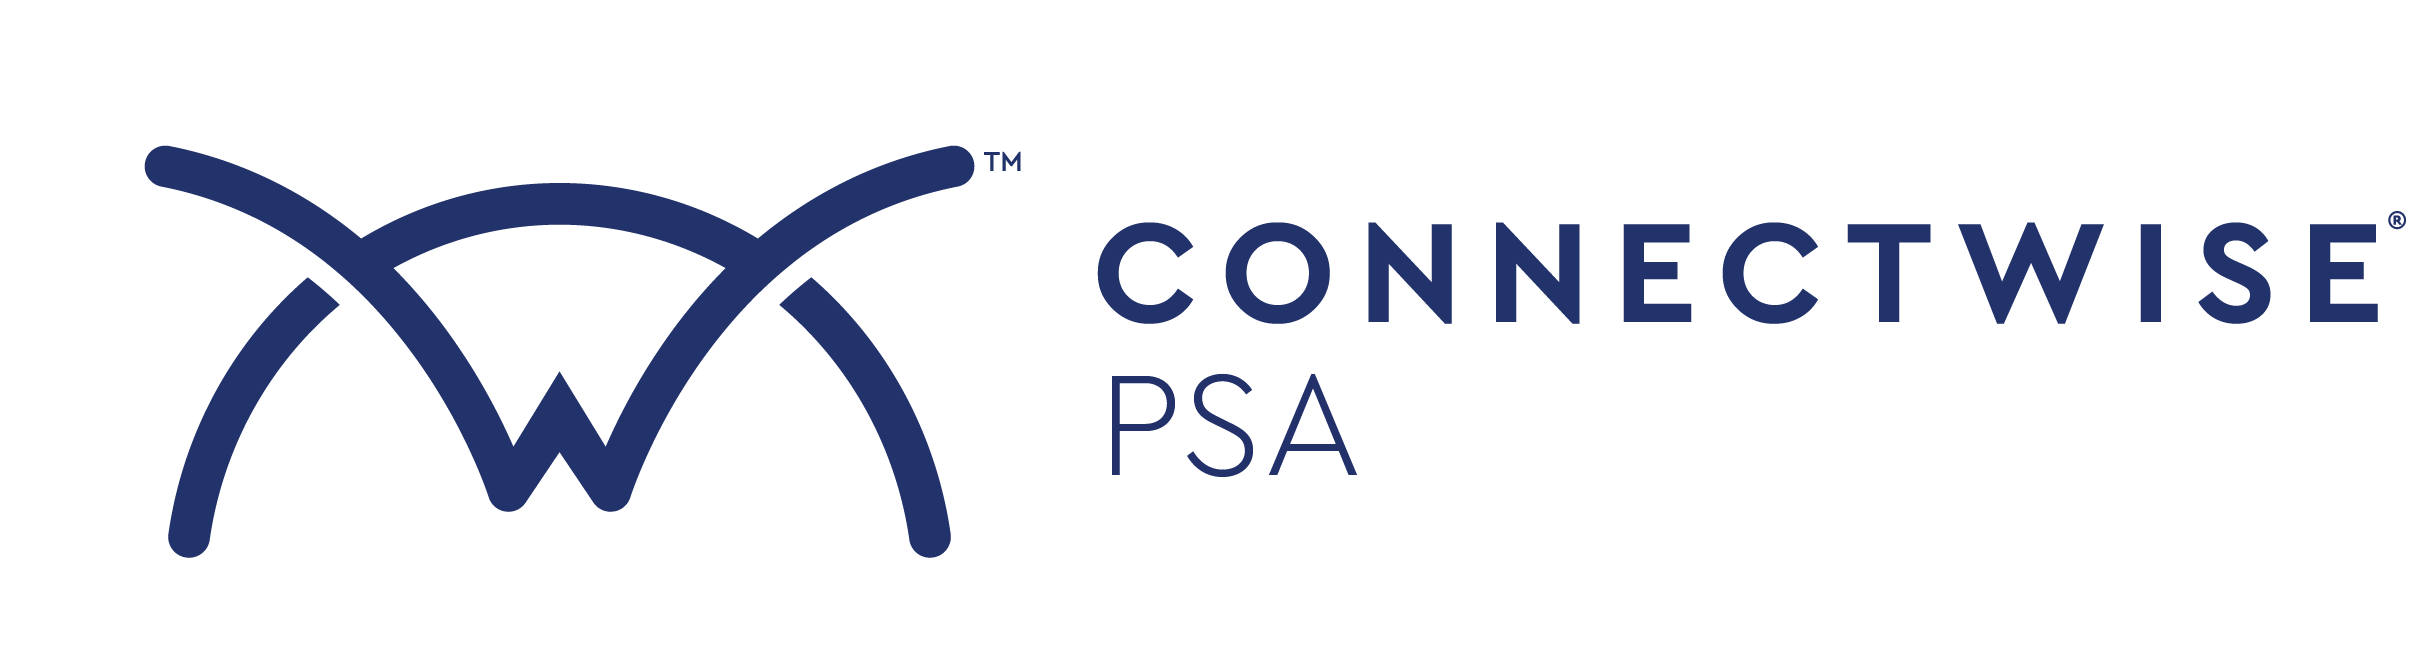 The ConnectWise PSA logo